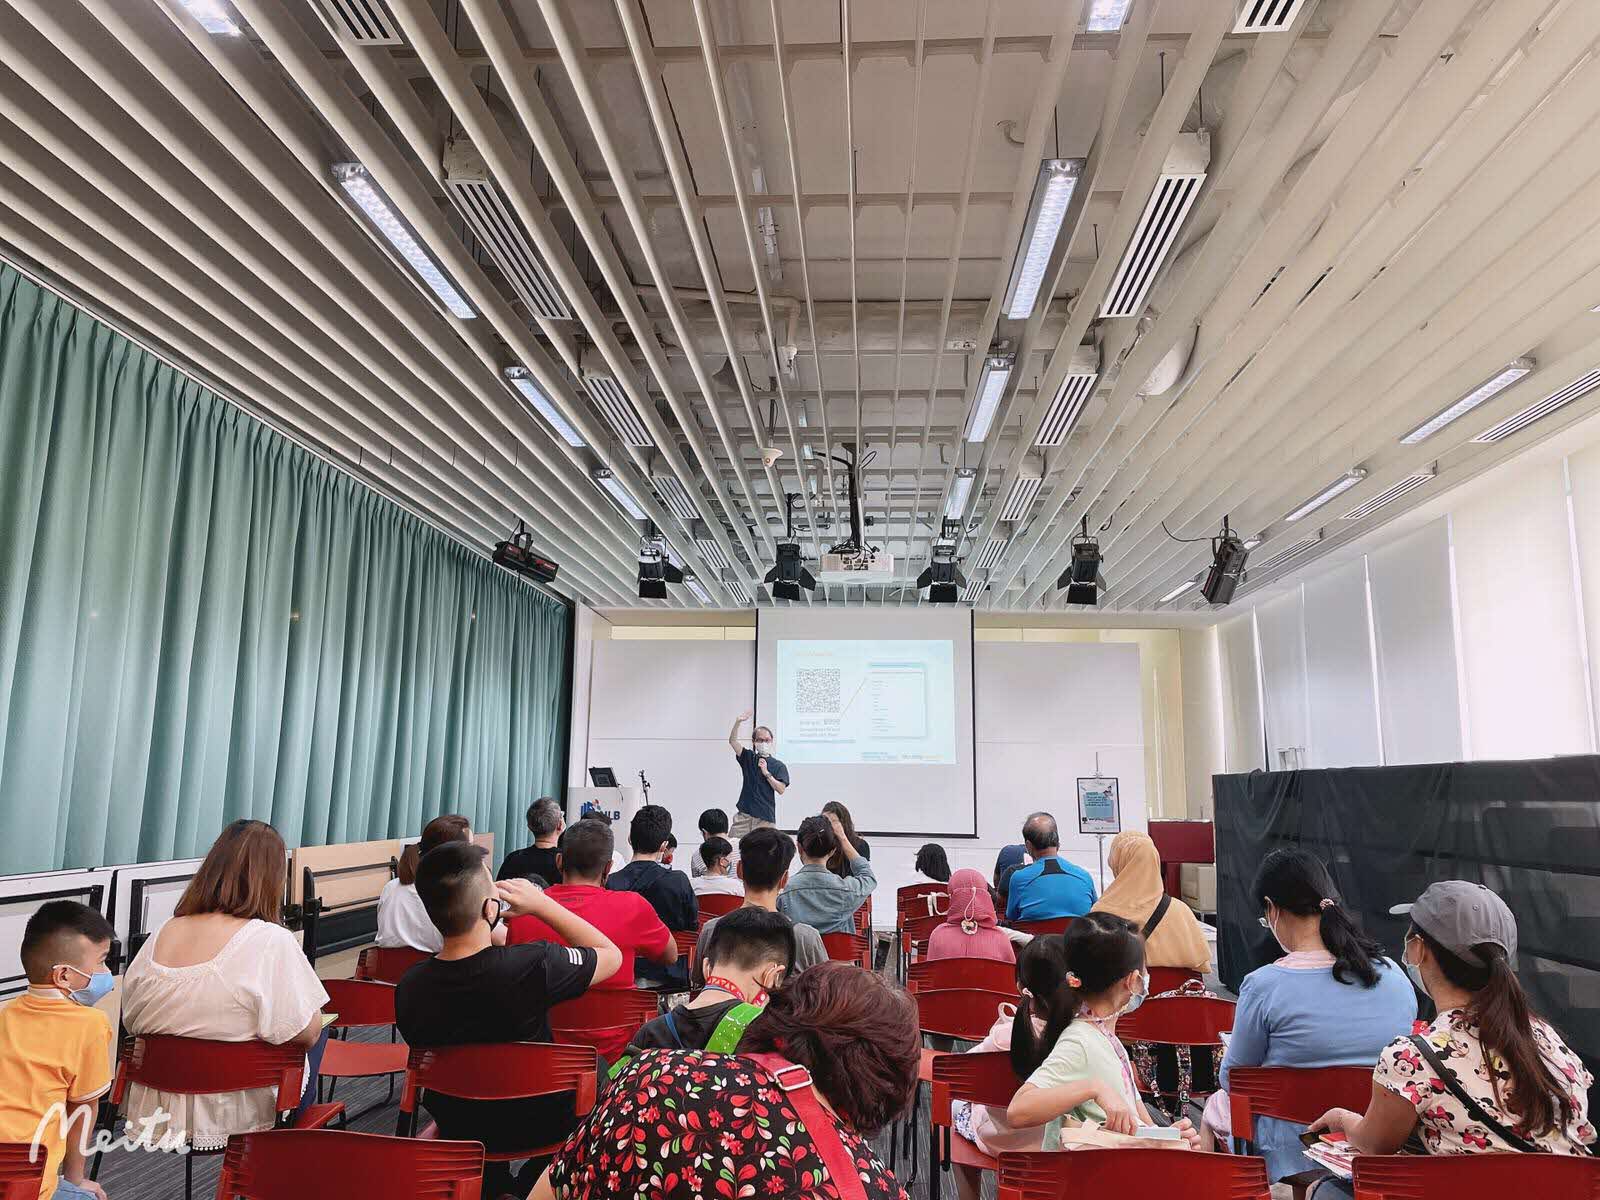 A talk conducted by IFL at Bishan Library in collaboration with NLB